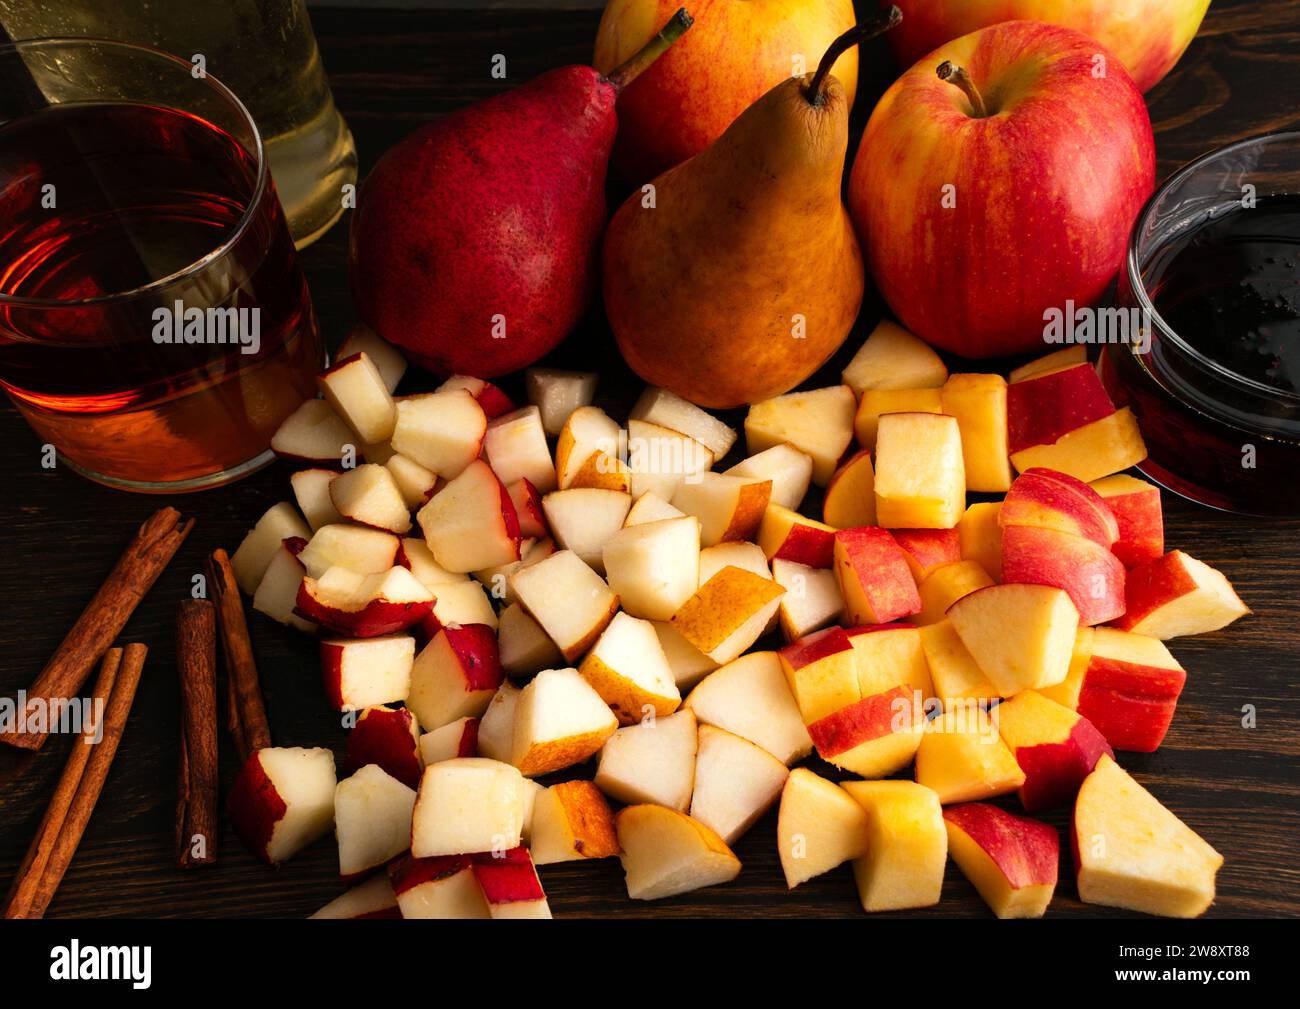 Chopped Bosc Pears, Red Anjou Pears, and Honey Crisp Apples: Chopped fruit with by whole pears and apples, cinnamon sticks, bourbon, and maple syrup Stock Photo